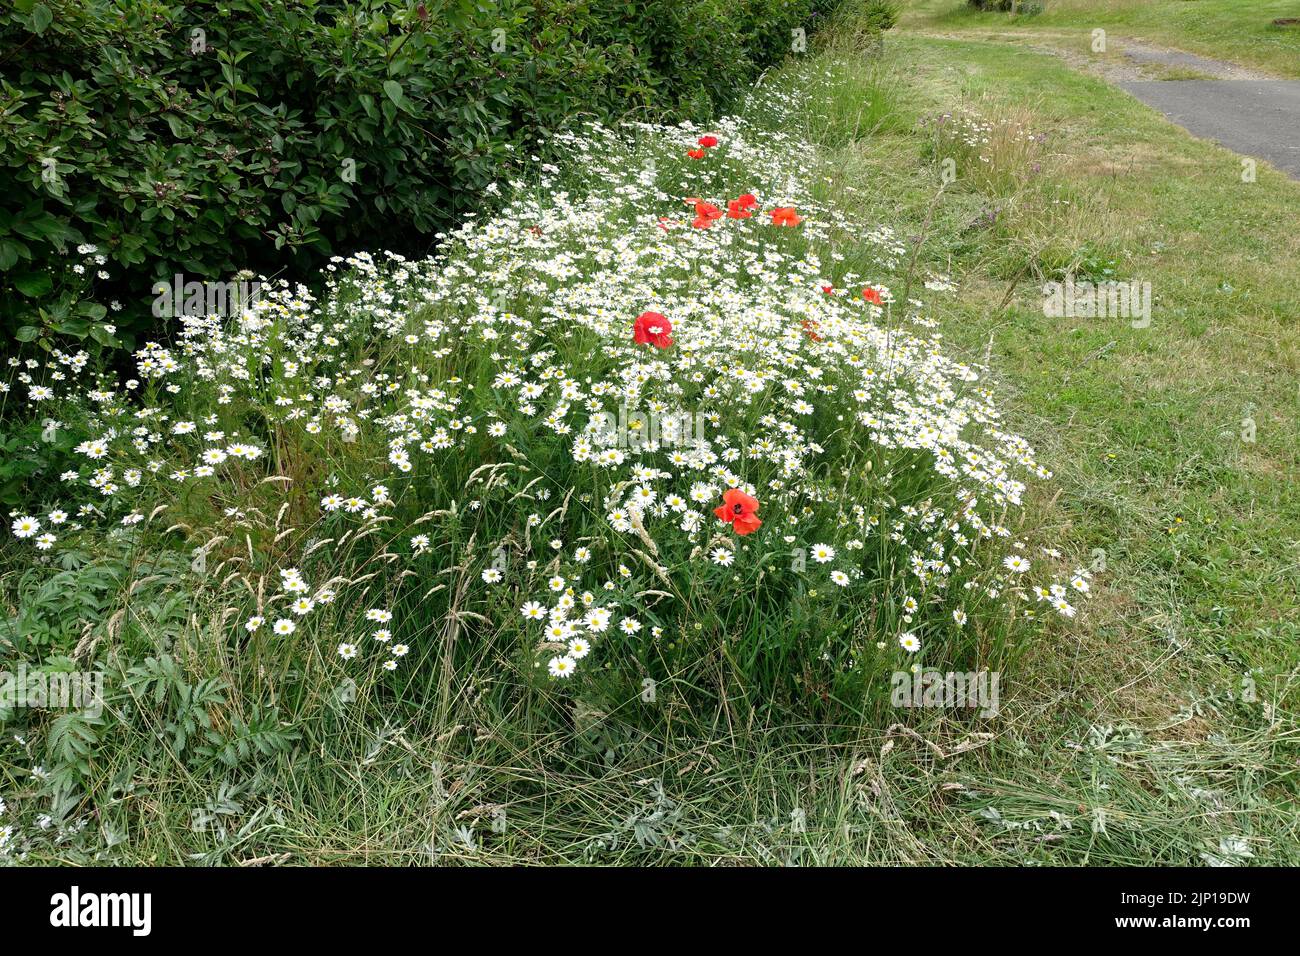 Wild flowersmainly daisies and poppies  sown along edge dogwood hedge Colemans Hill Farm UK Stock Photo